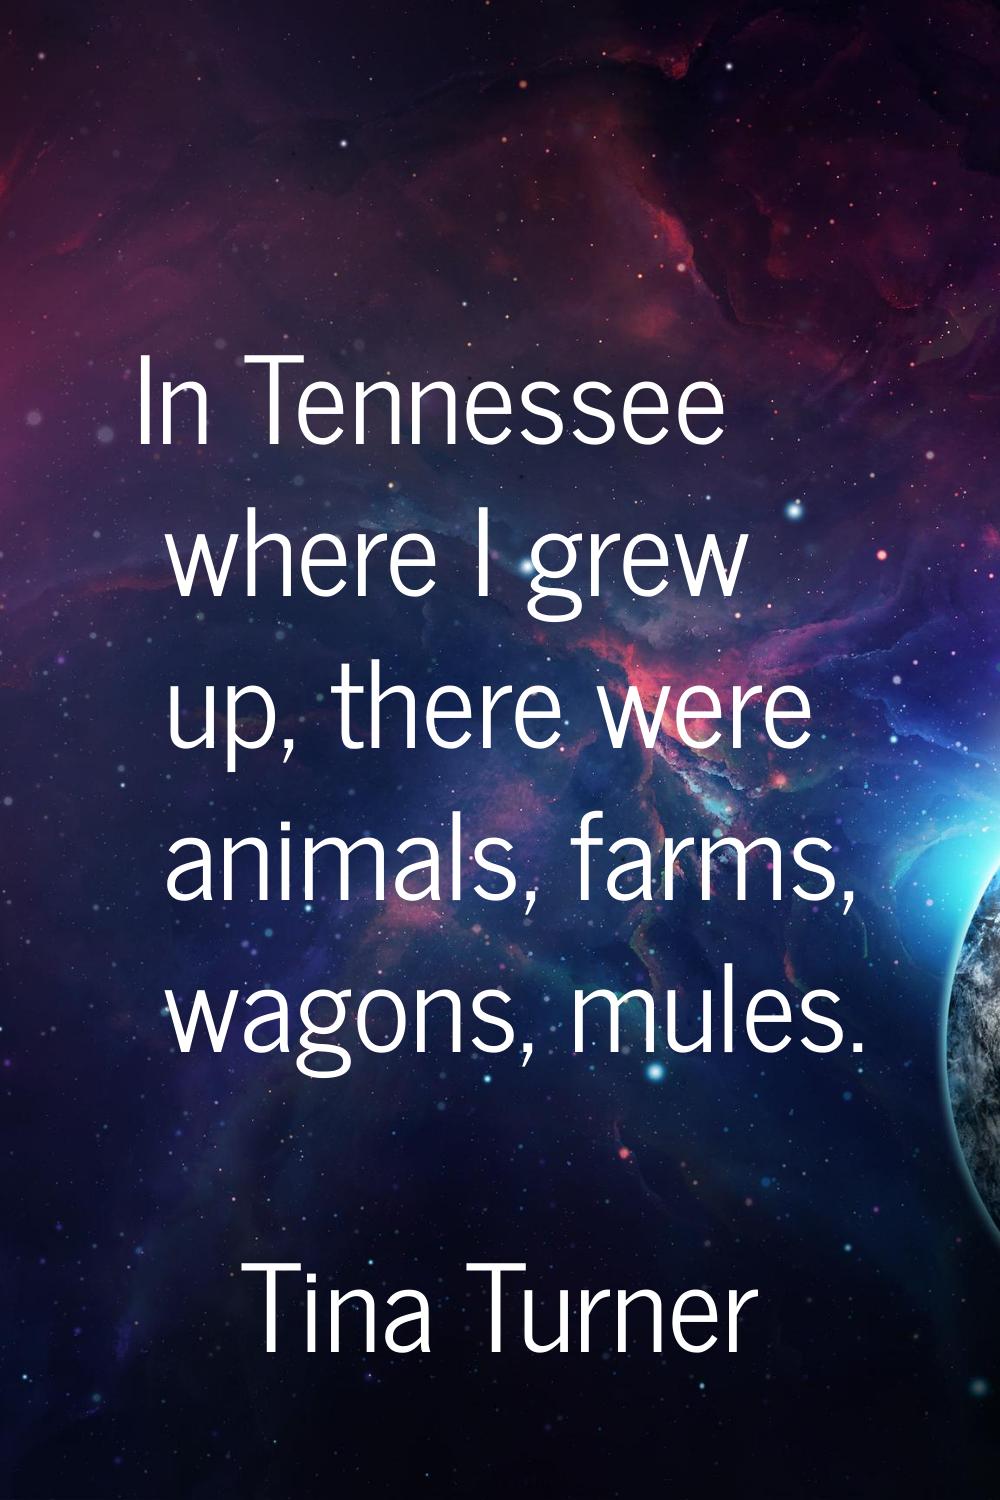 In Tennessee where I grew up, there were animals, farms, wagons, mules.